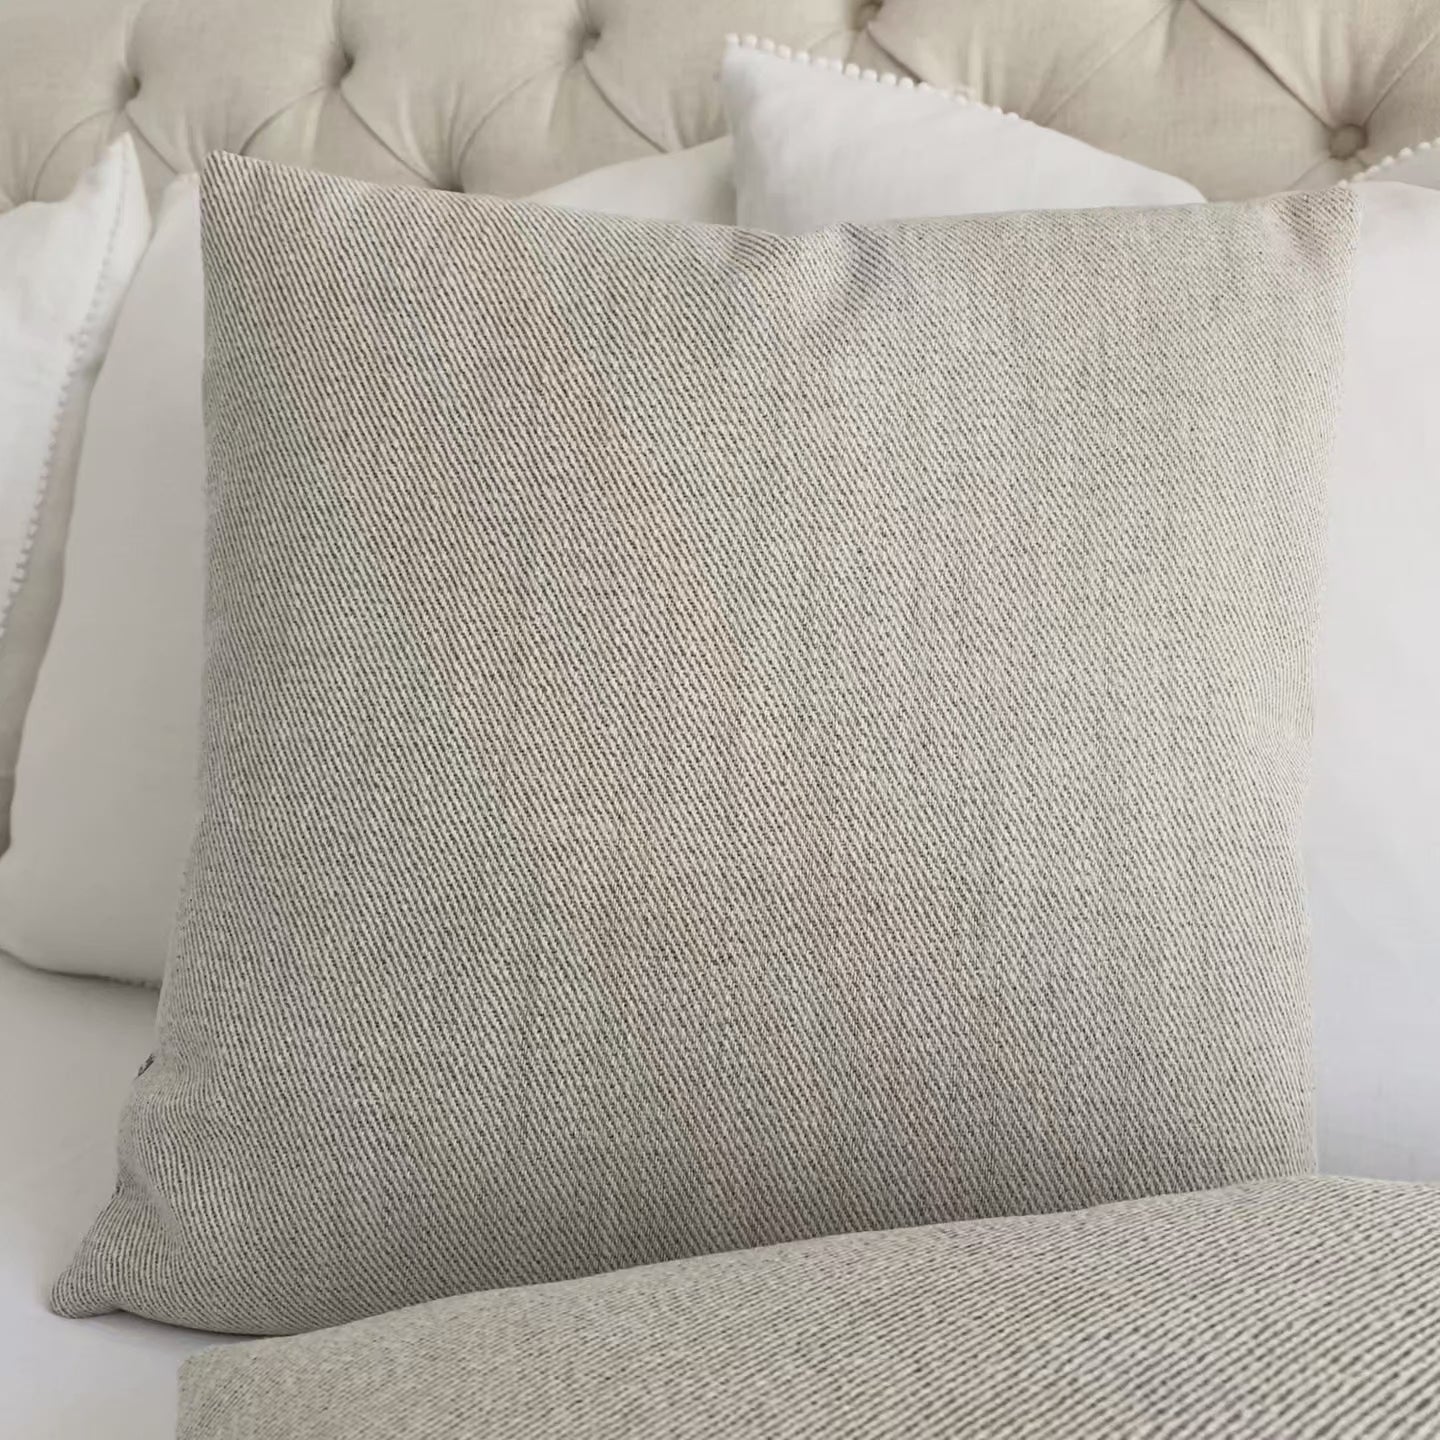 Schumacher Everett Performance Twill Natural Solid Designer Decorative Throw Pillow Cover Product Video